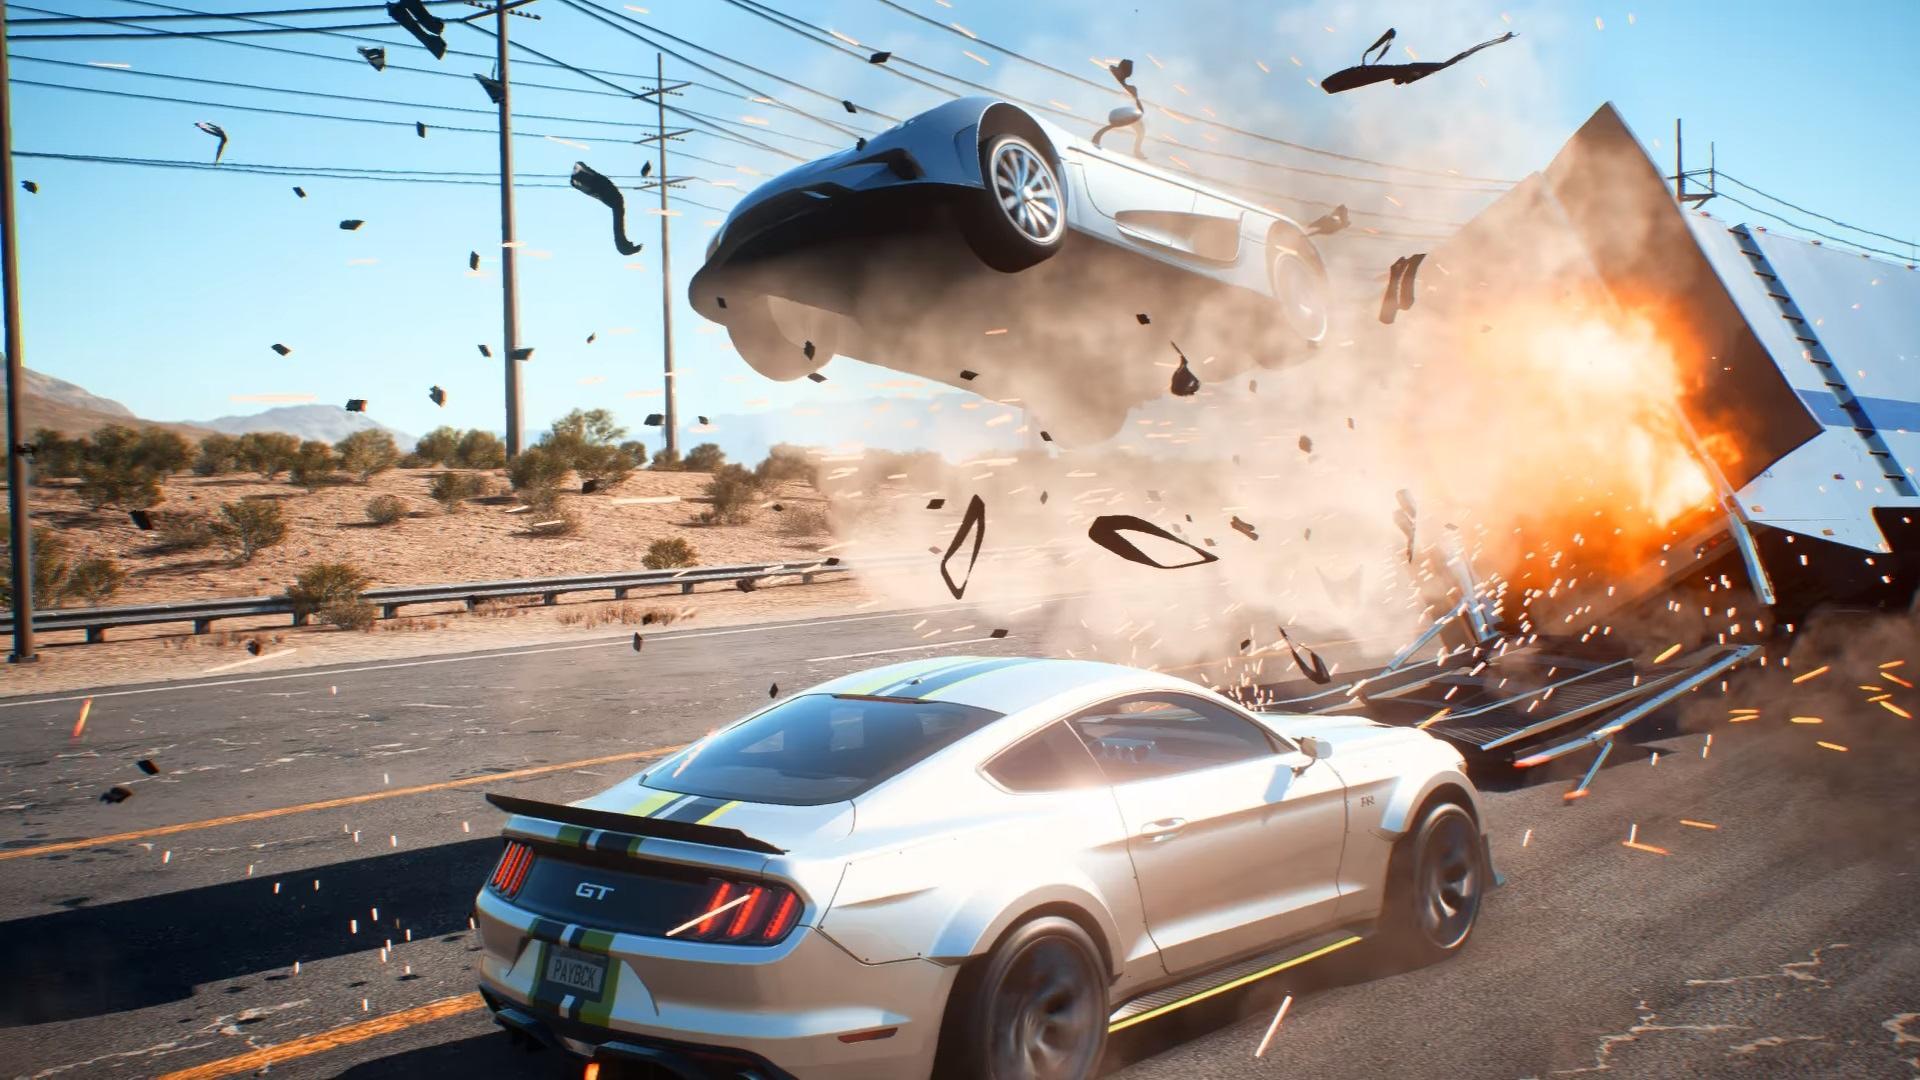 Video NFS Payback title is like E3 became a Fast and Furious